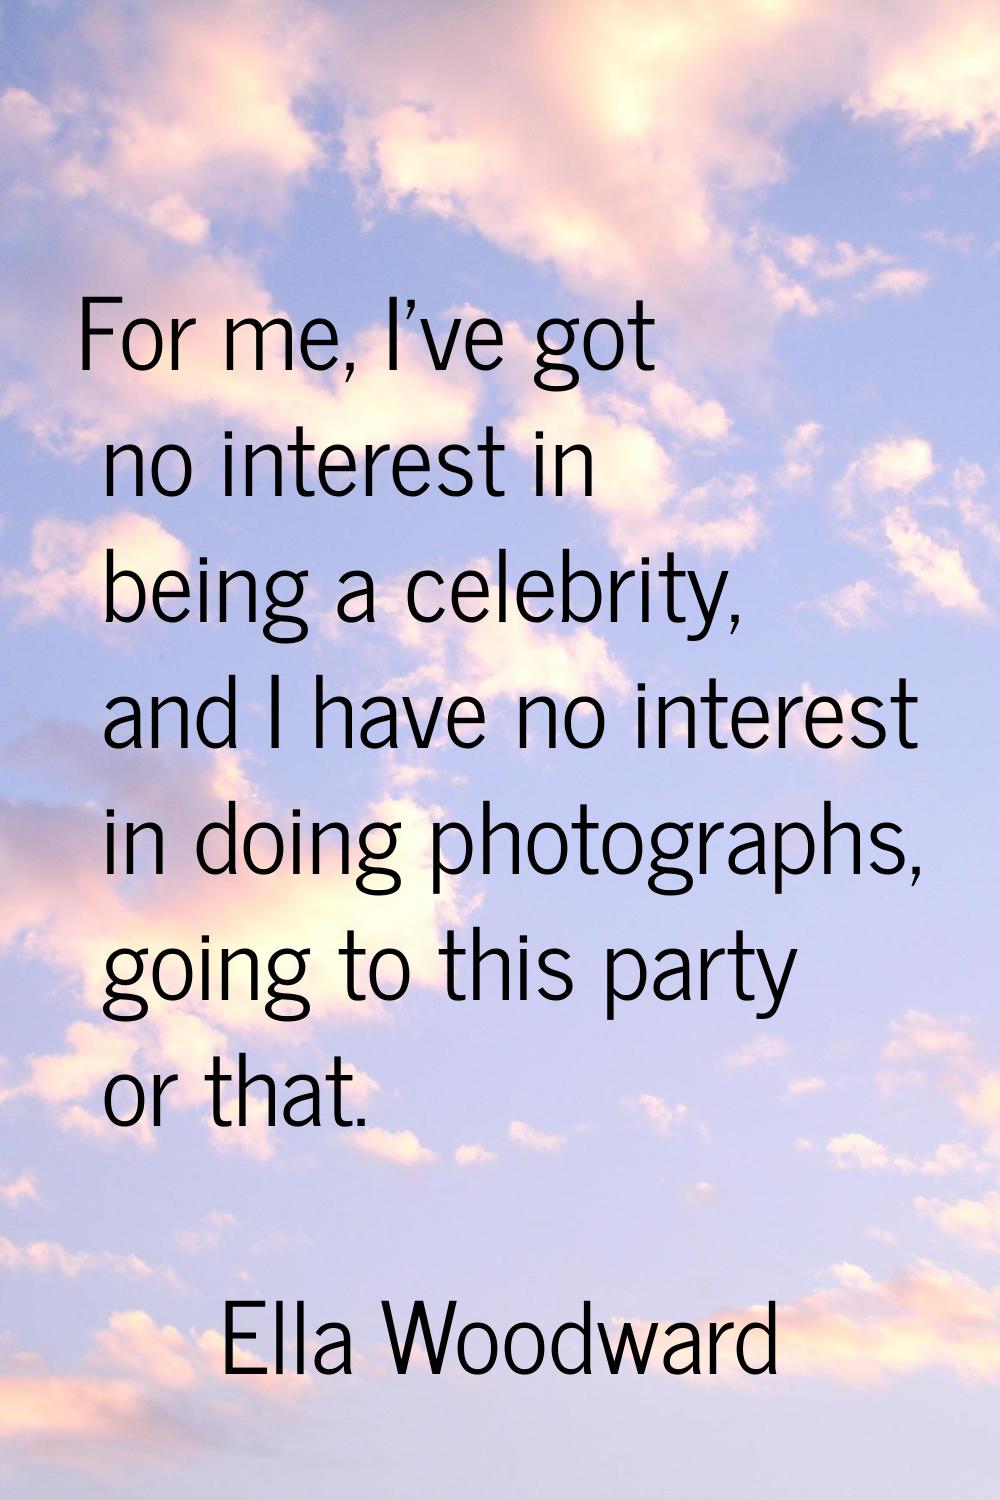 For me, I've got no interest in being a celebrity, and I have no interest in doing photographs, goi